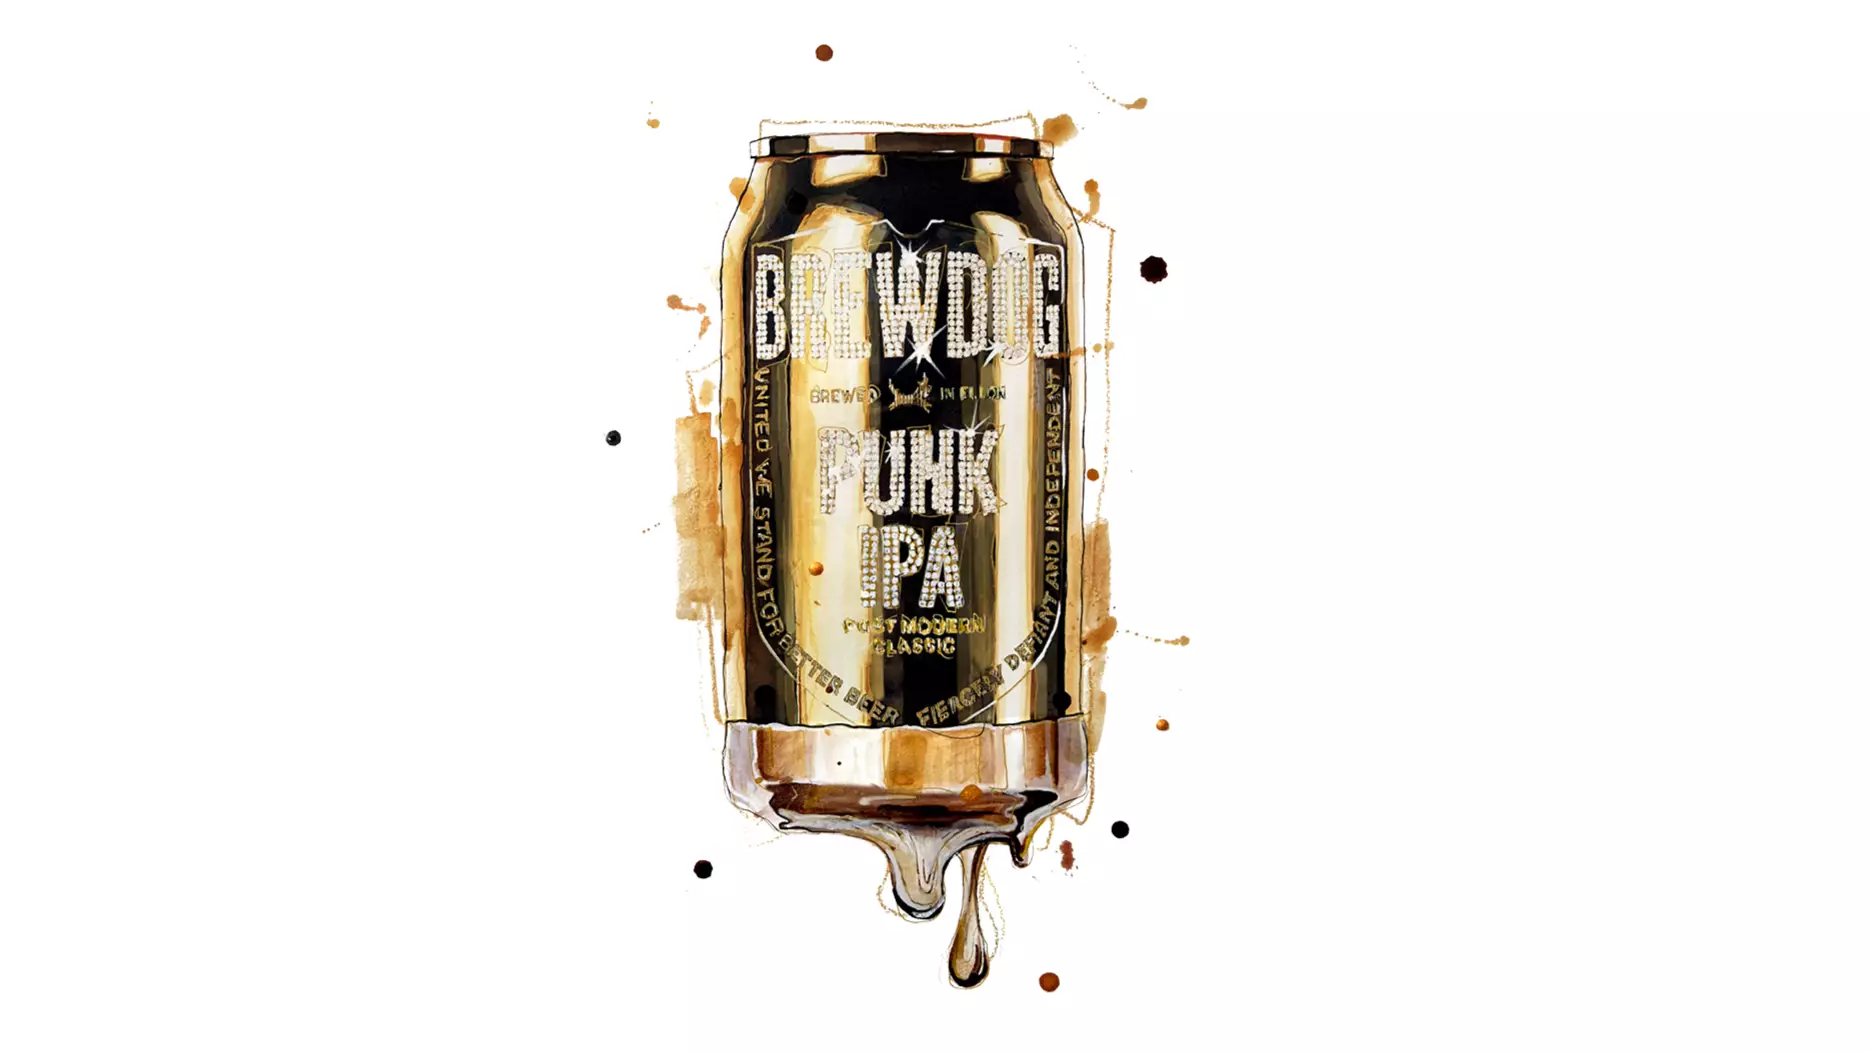 BrewDog Brings Back Gold-Plated Cans After Previous Competition Deemed Misleading